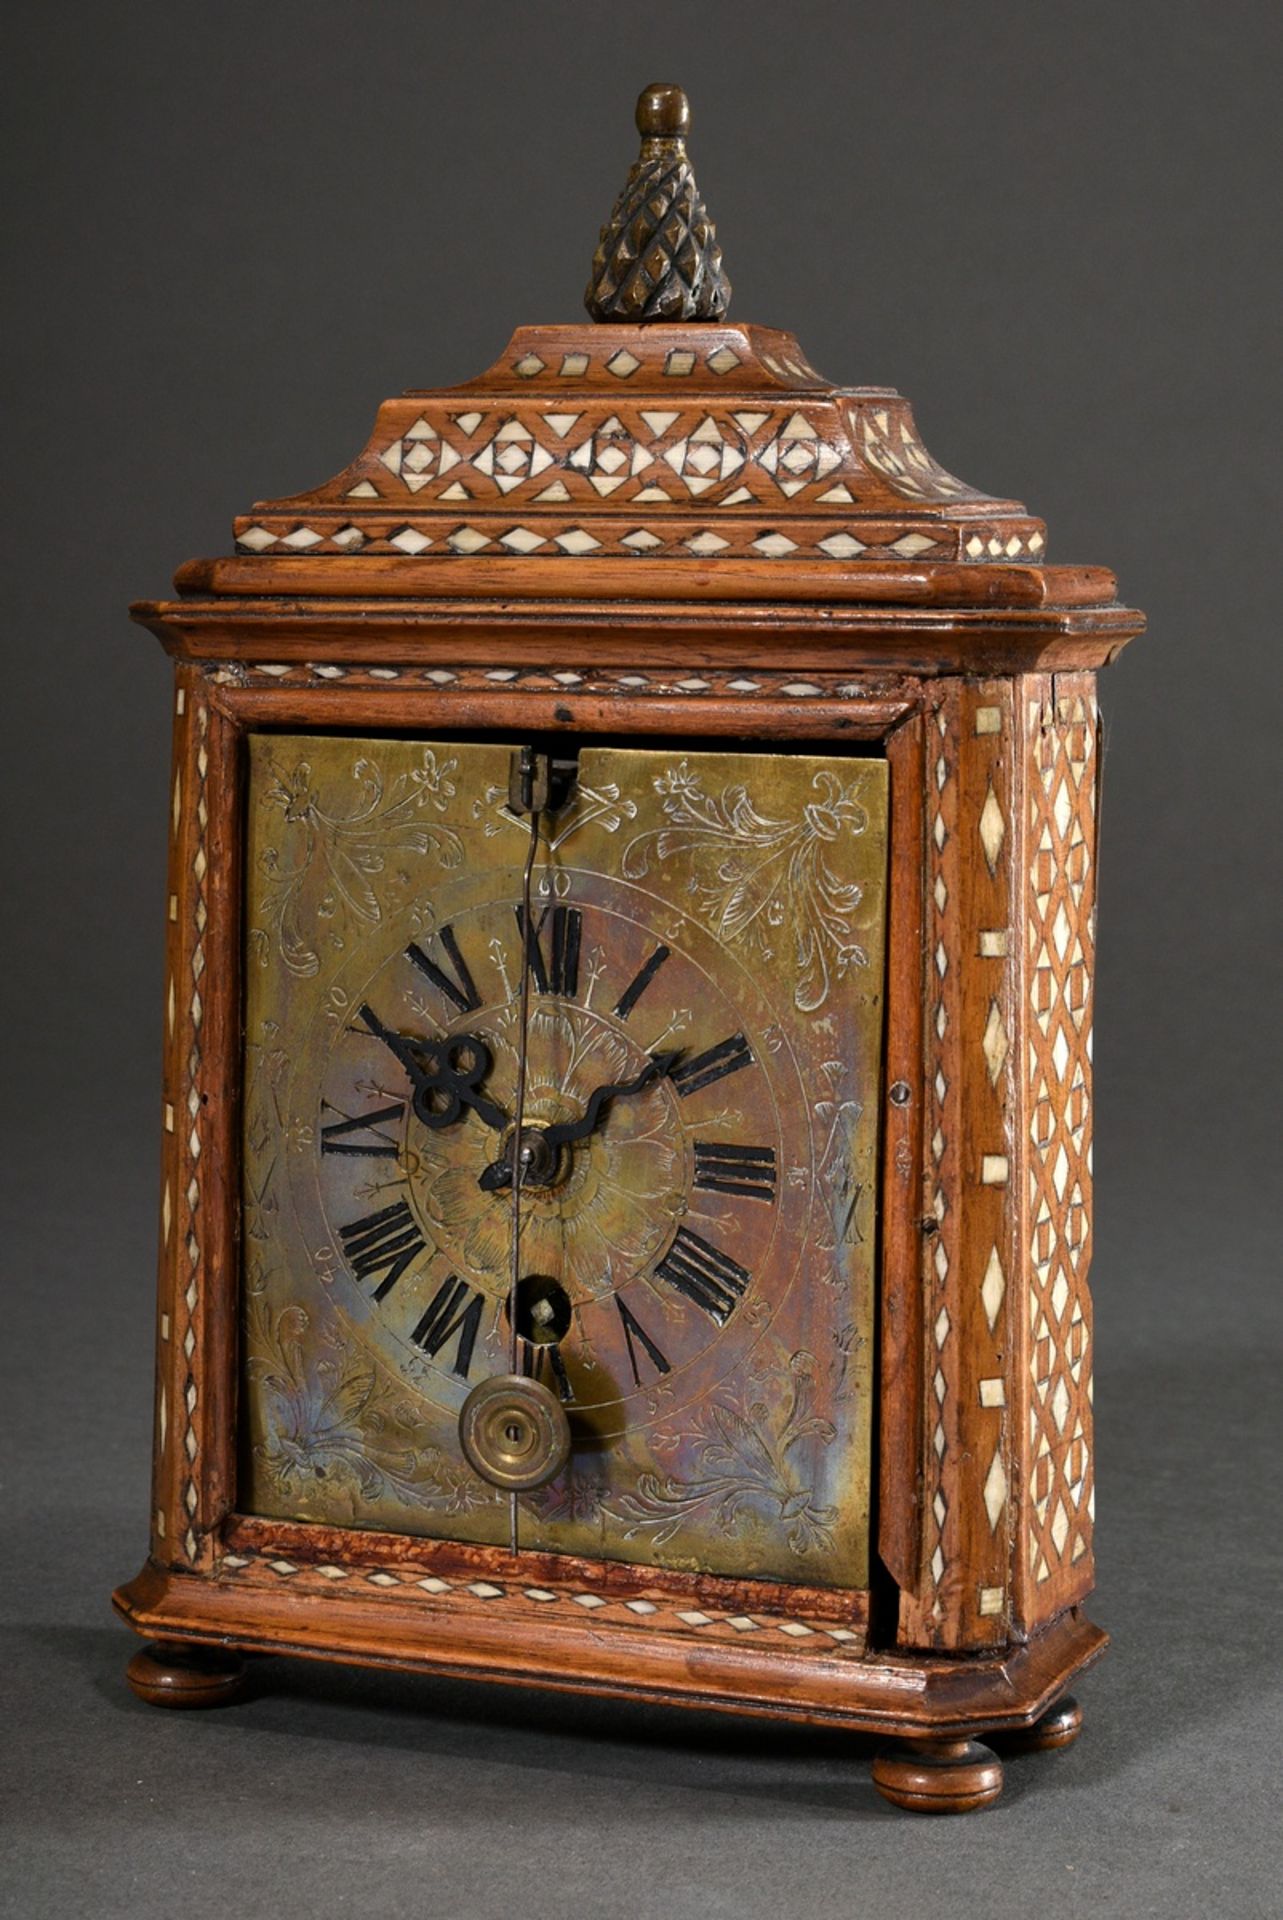 Small Vorderzappler clock in fruitwood case with geometric bone inlays and pineapple crown, florall - Image 2 of 9